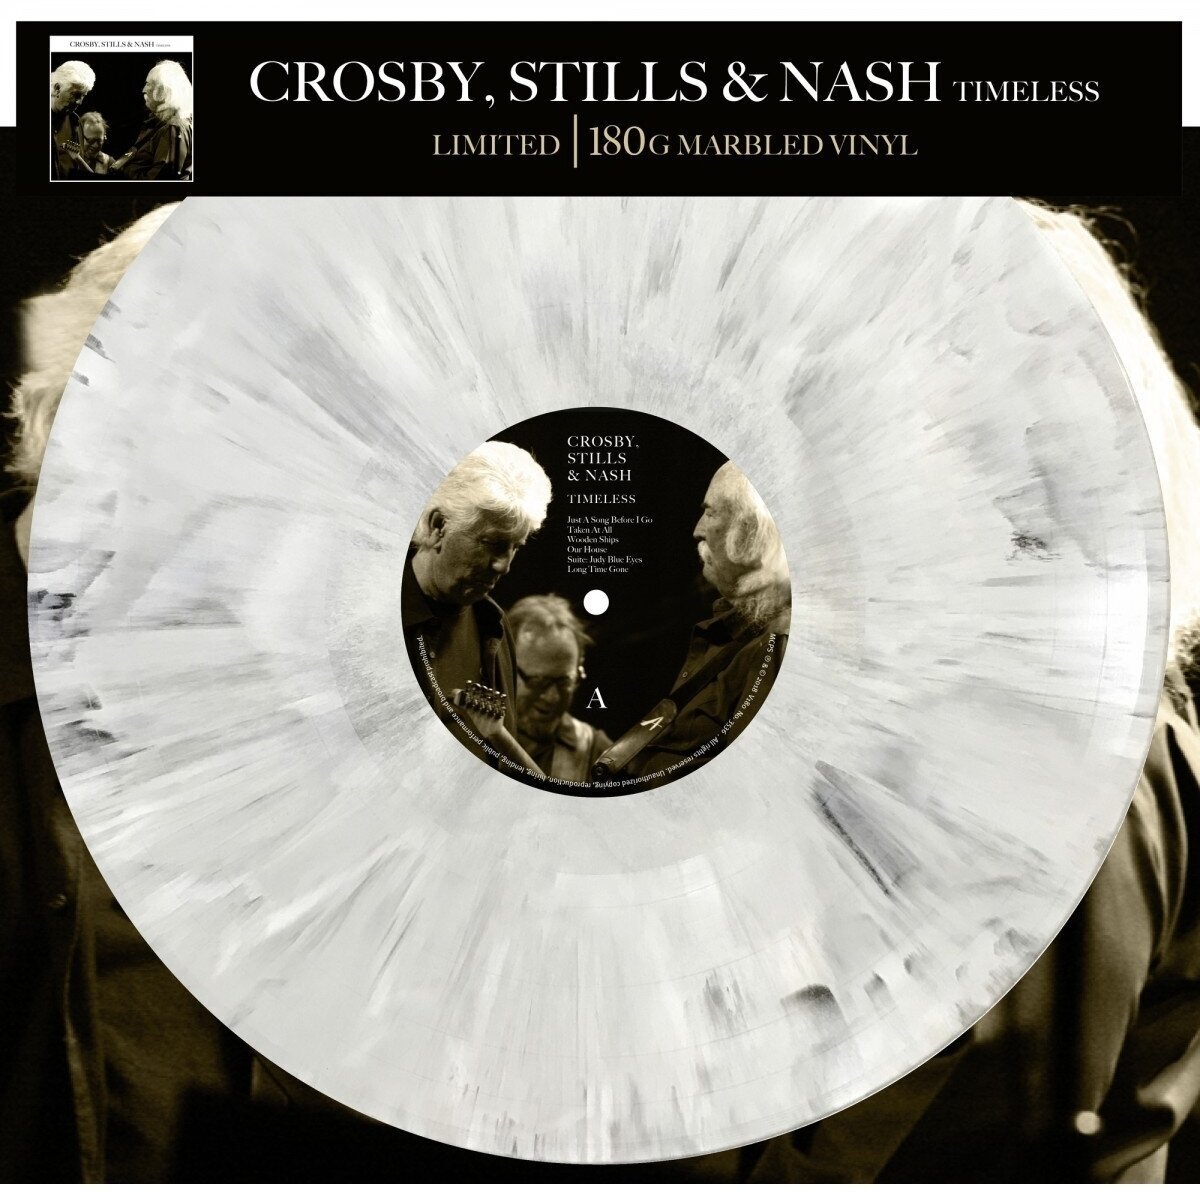 Vinyl Record Crosby, Stills & Nash - Timeless (The Wonderful Live Recordin) (Limited Edition) (Marbled Coloured) (LP)